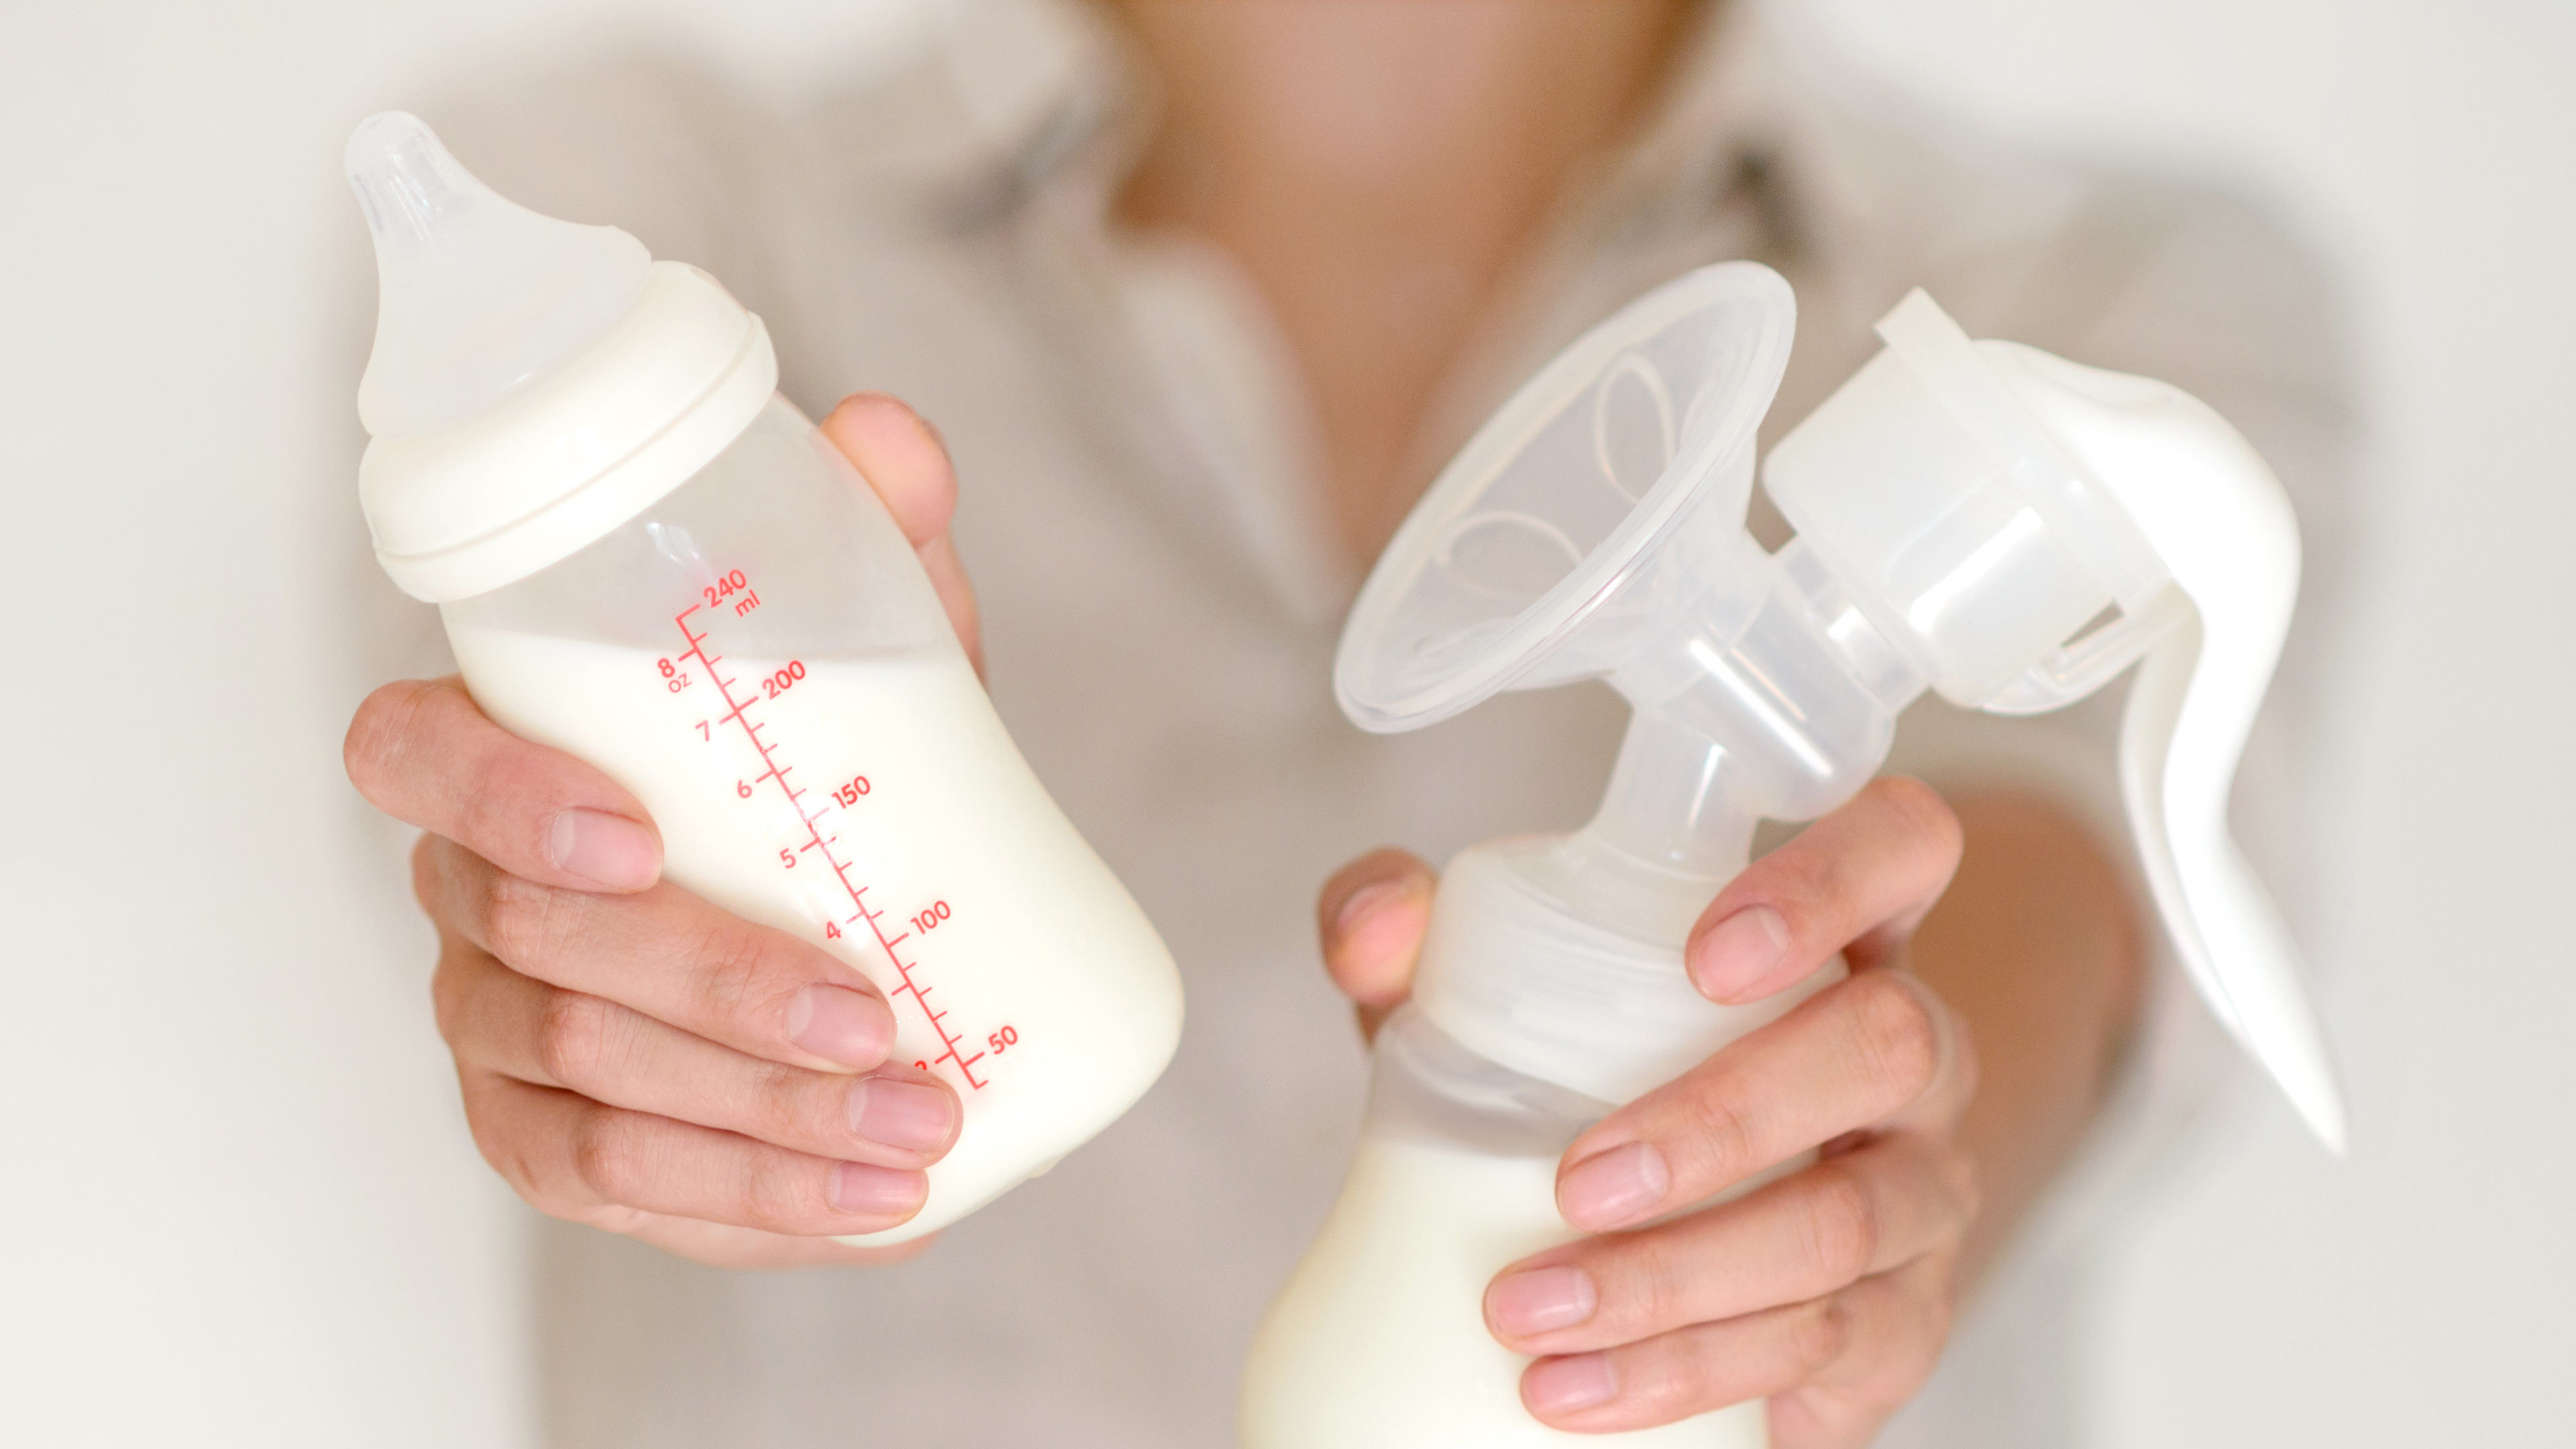 Live - Breastfeeding and pumping essentials